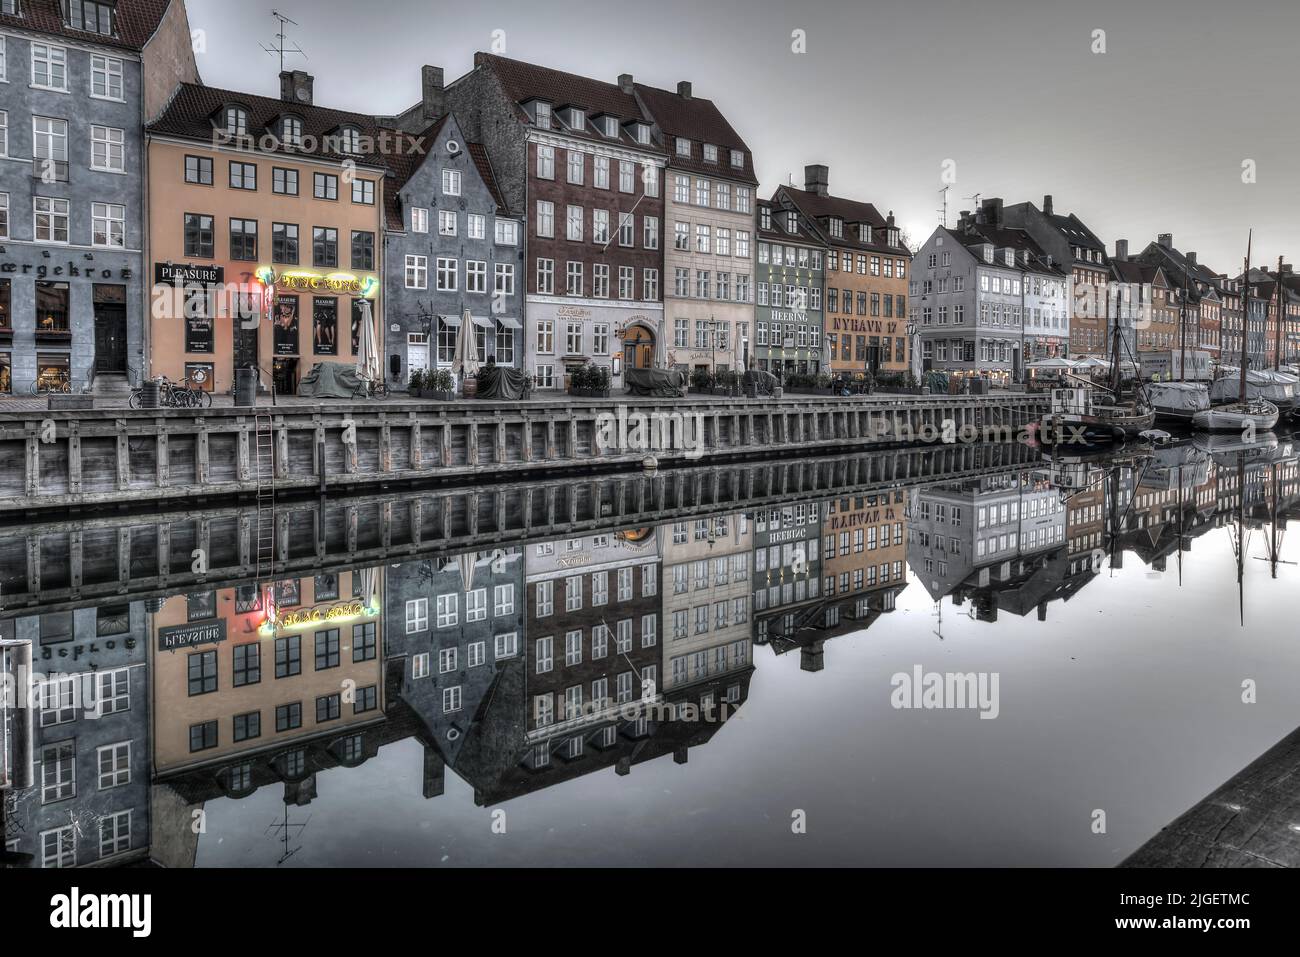 Nyhavn an early grey winter morning with reflections in the canal, Copenhagen, February 16, 2019 Stock Photo